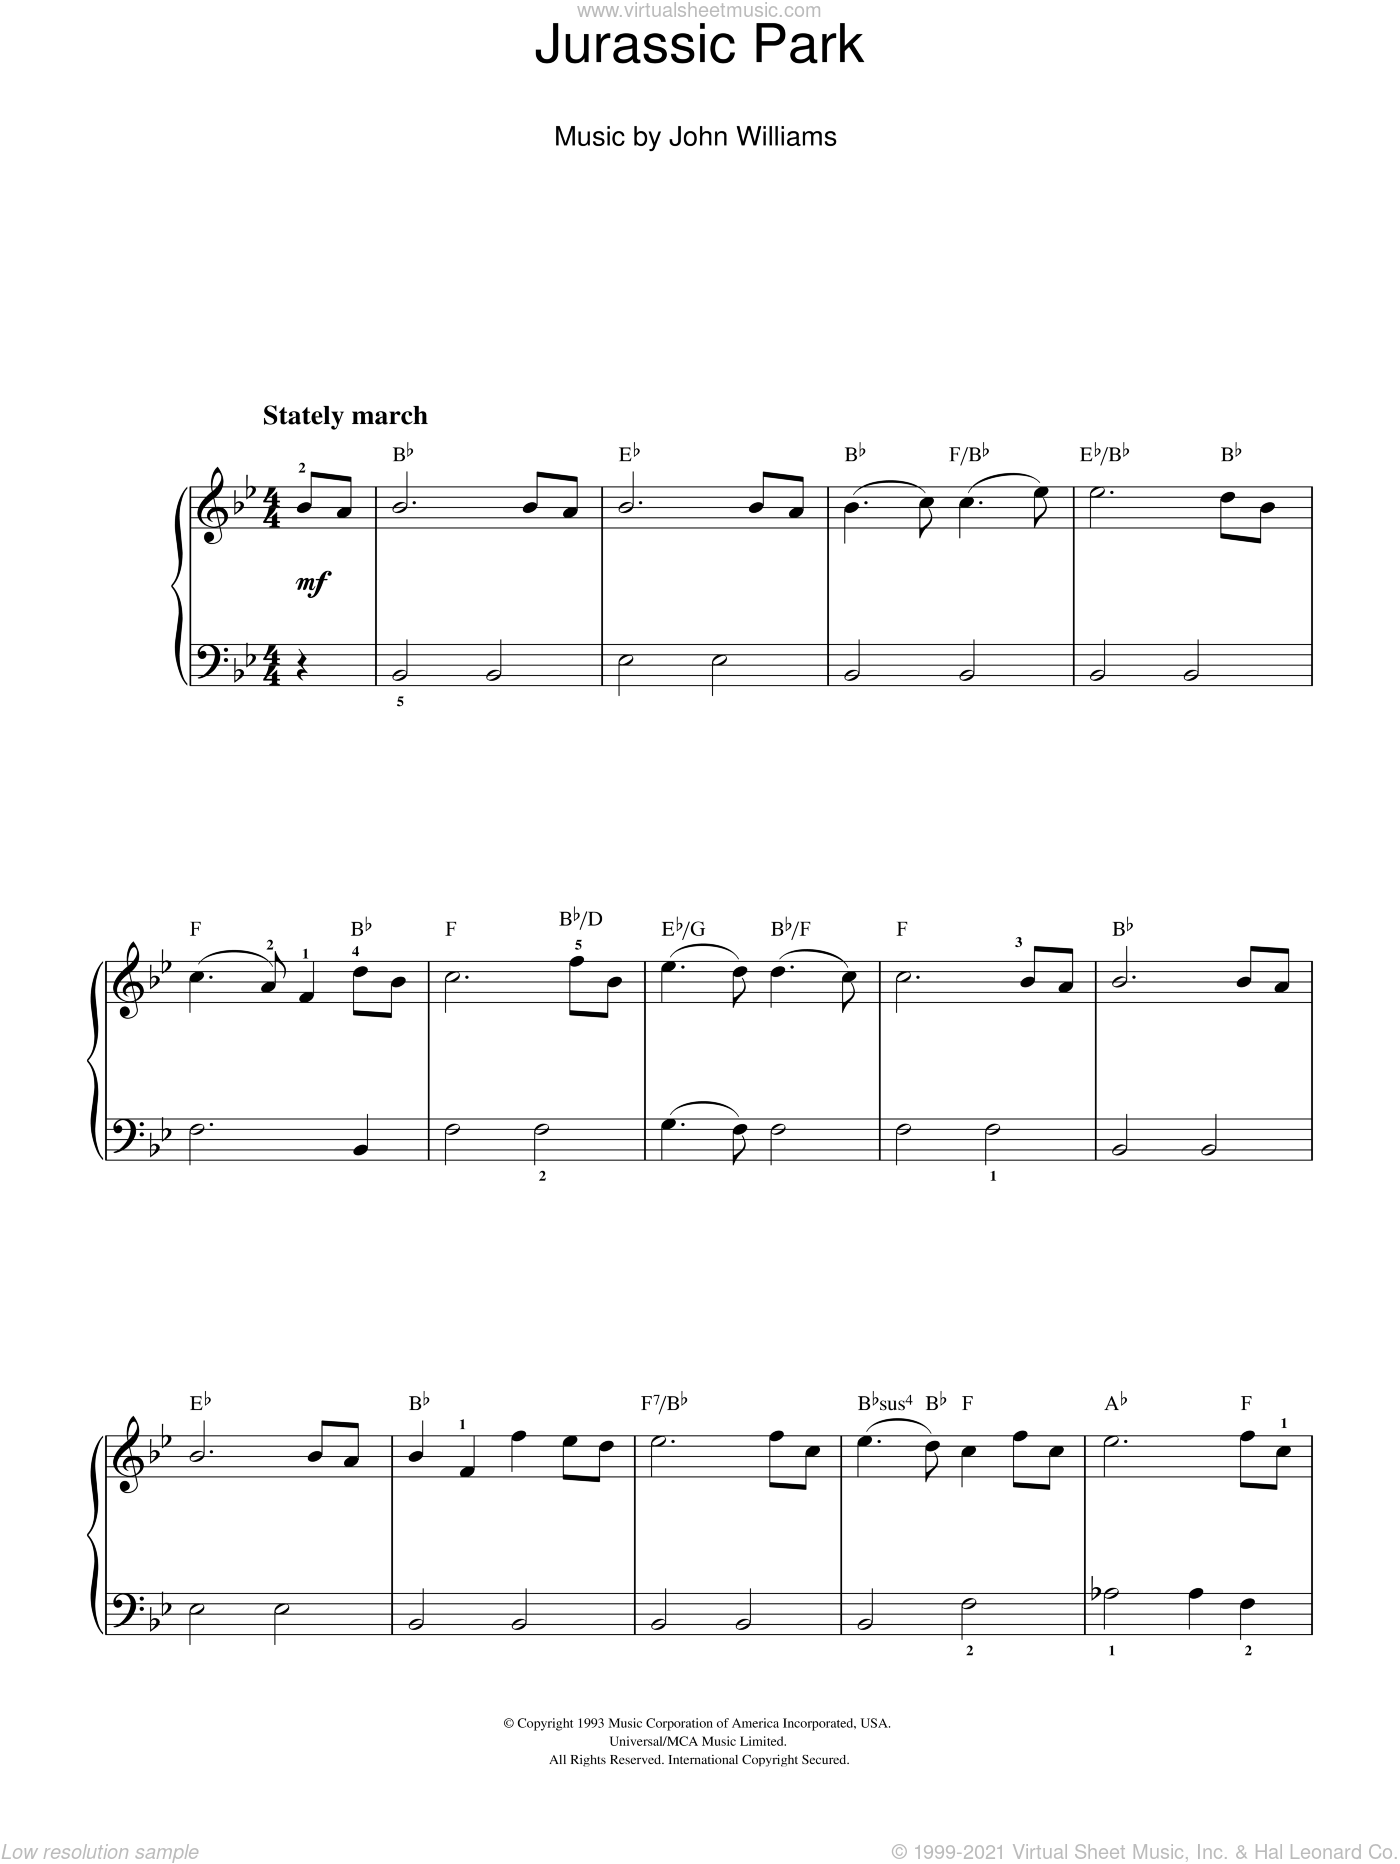 williams-jurassic-park-theme-sheet-music-easy-for-piano-solo